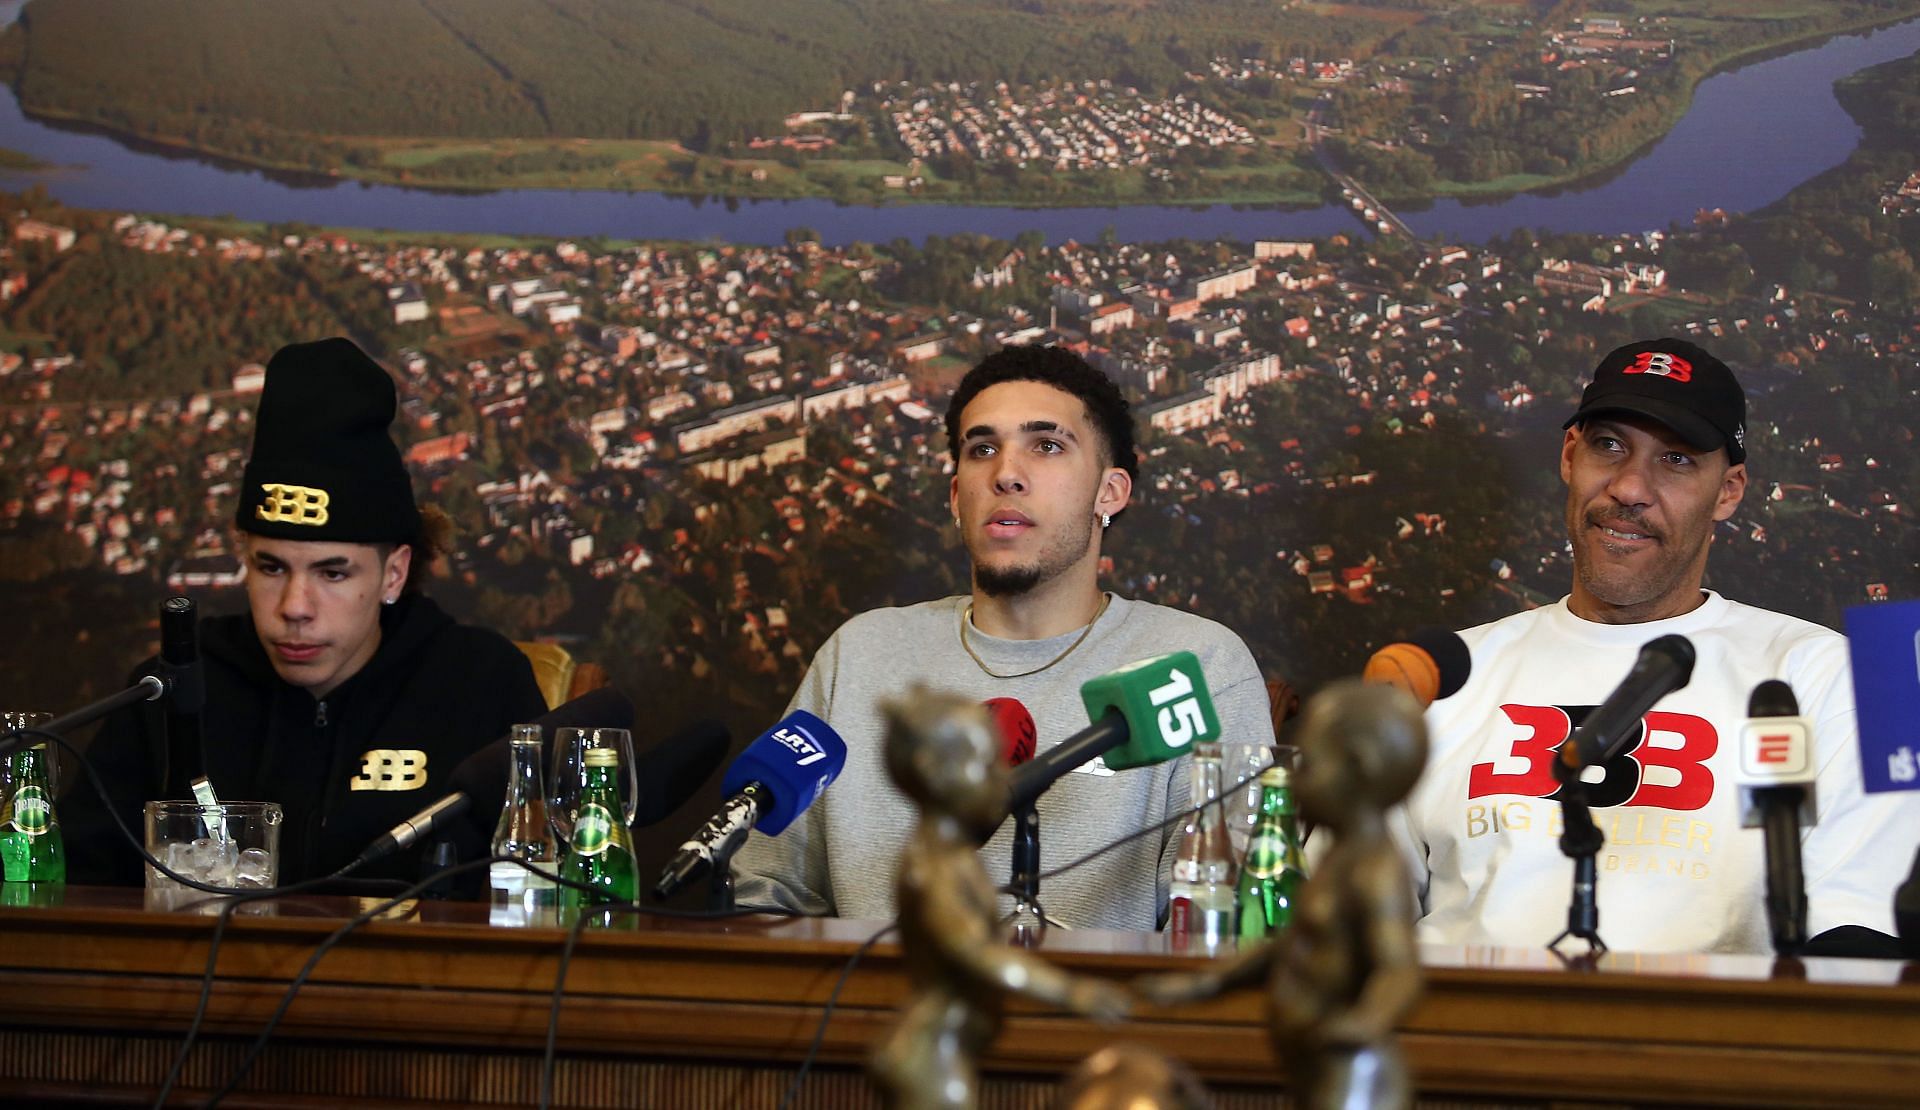 LaMelo, LiAngelo and LaVar Ball during a press conference in Lithuania